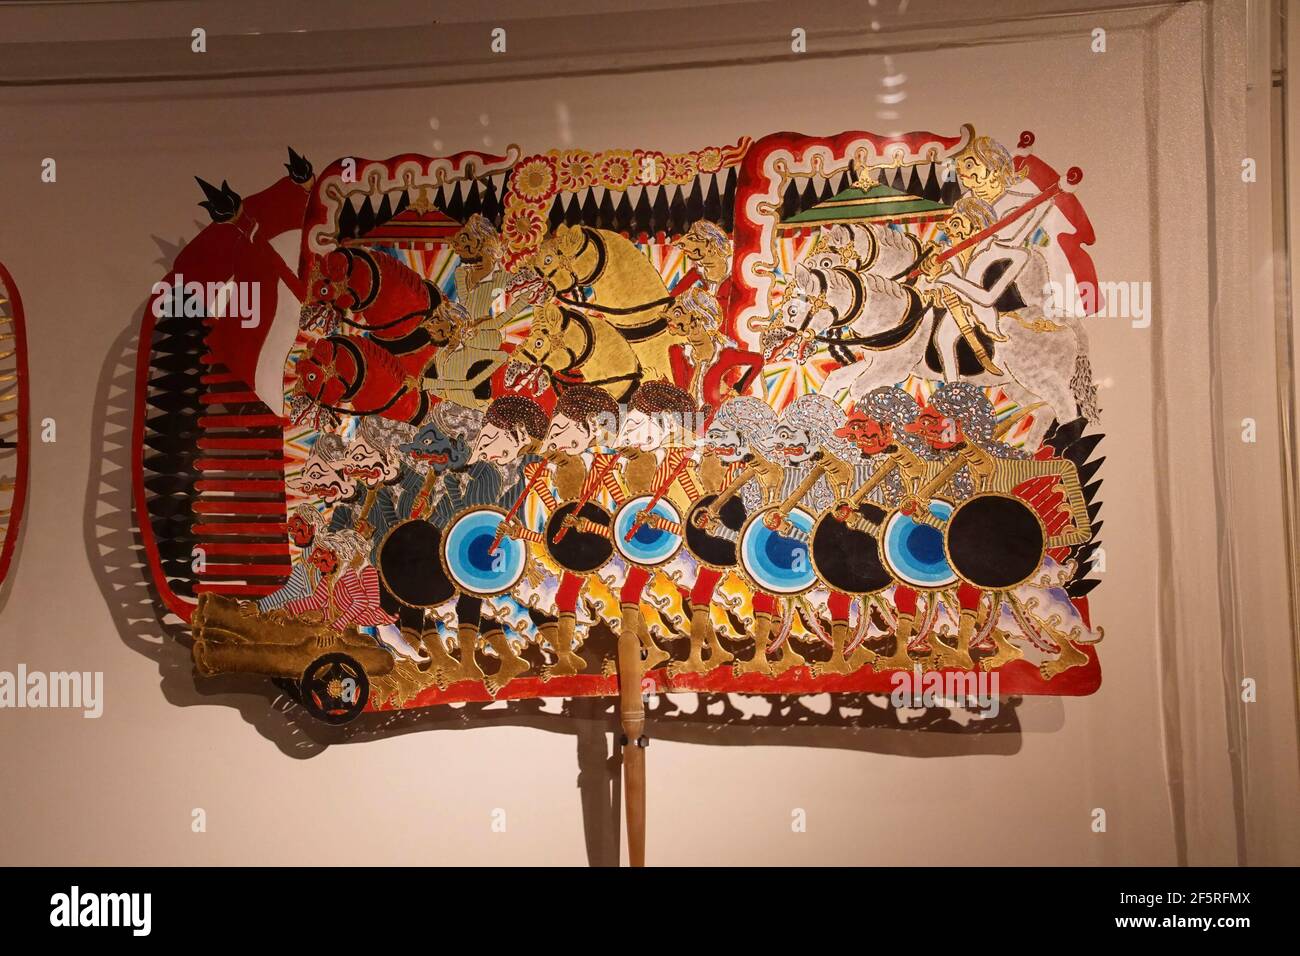 AMSTERDAM, NETHERLANDS - DEC 12, 2018 - Wayang puppets of Dutch colonial army and Javanese during Java War, Tropen Museum, Amsterdam, Netherlands Stock Photo